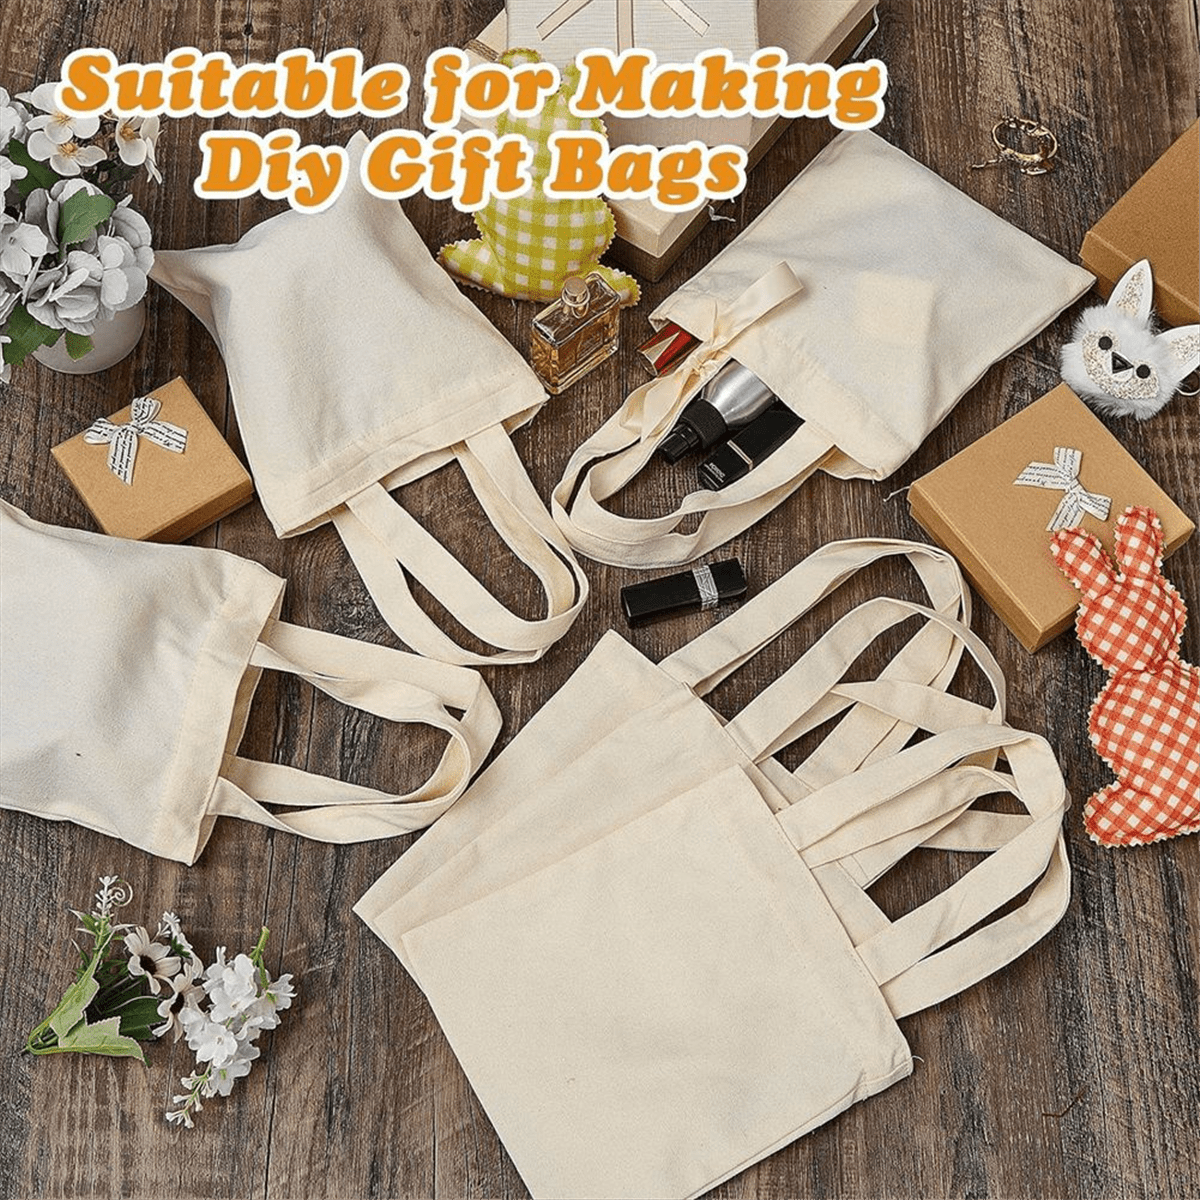 24 Pcs Mini Tote Bag Blank Canvas Tote Bags Reusable Grocery Bags